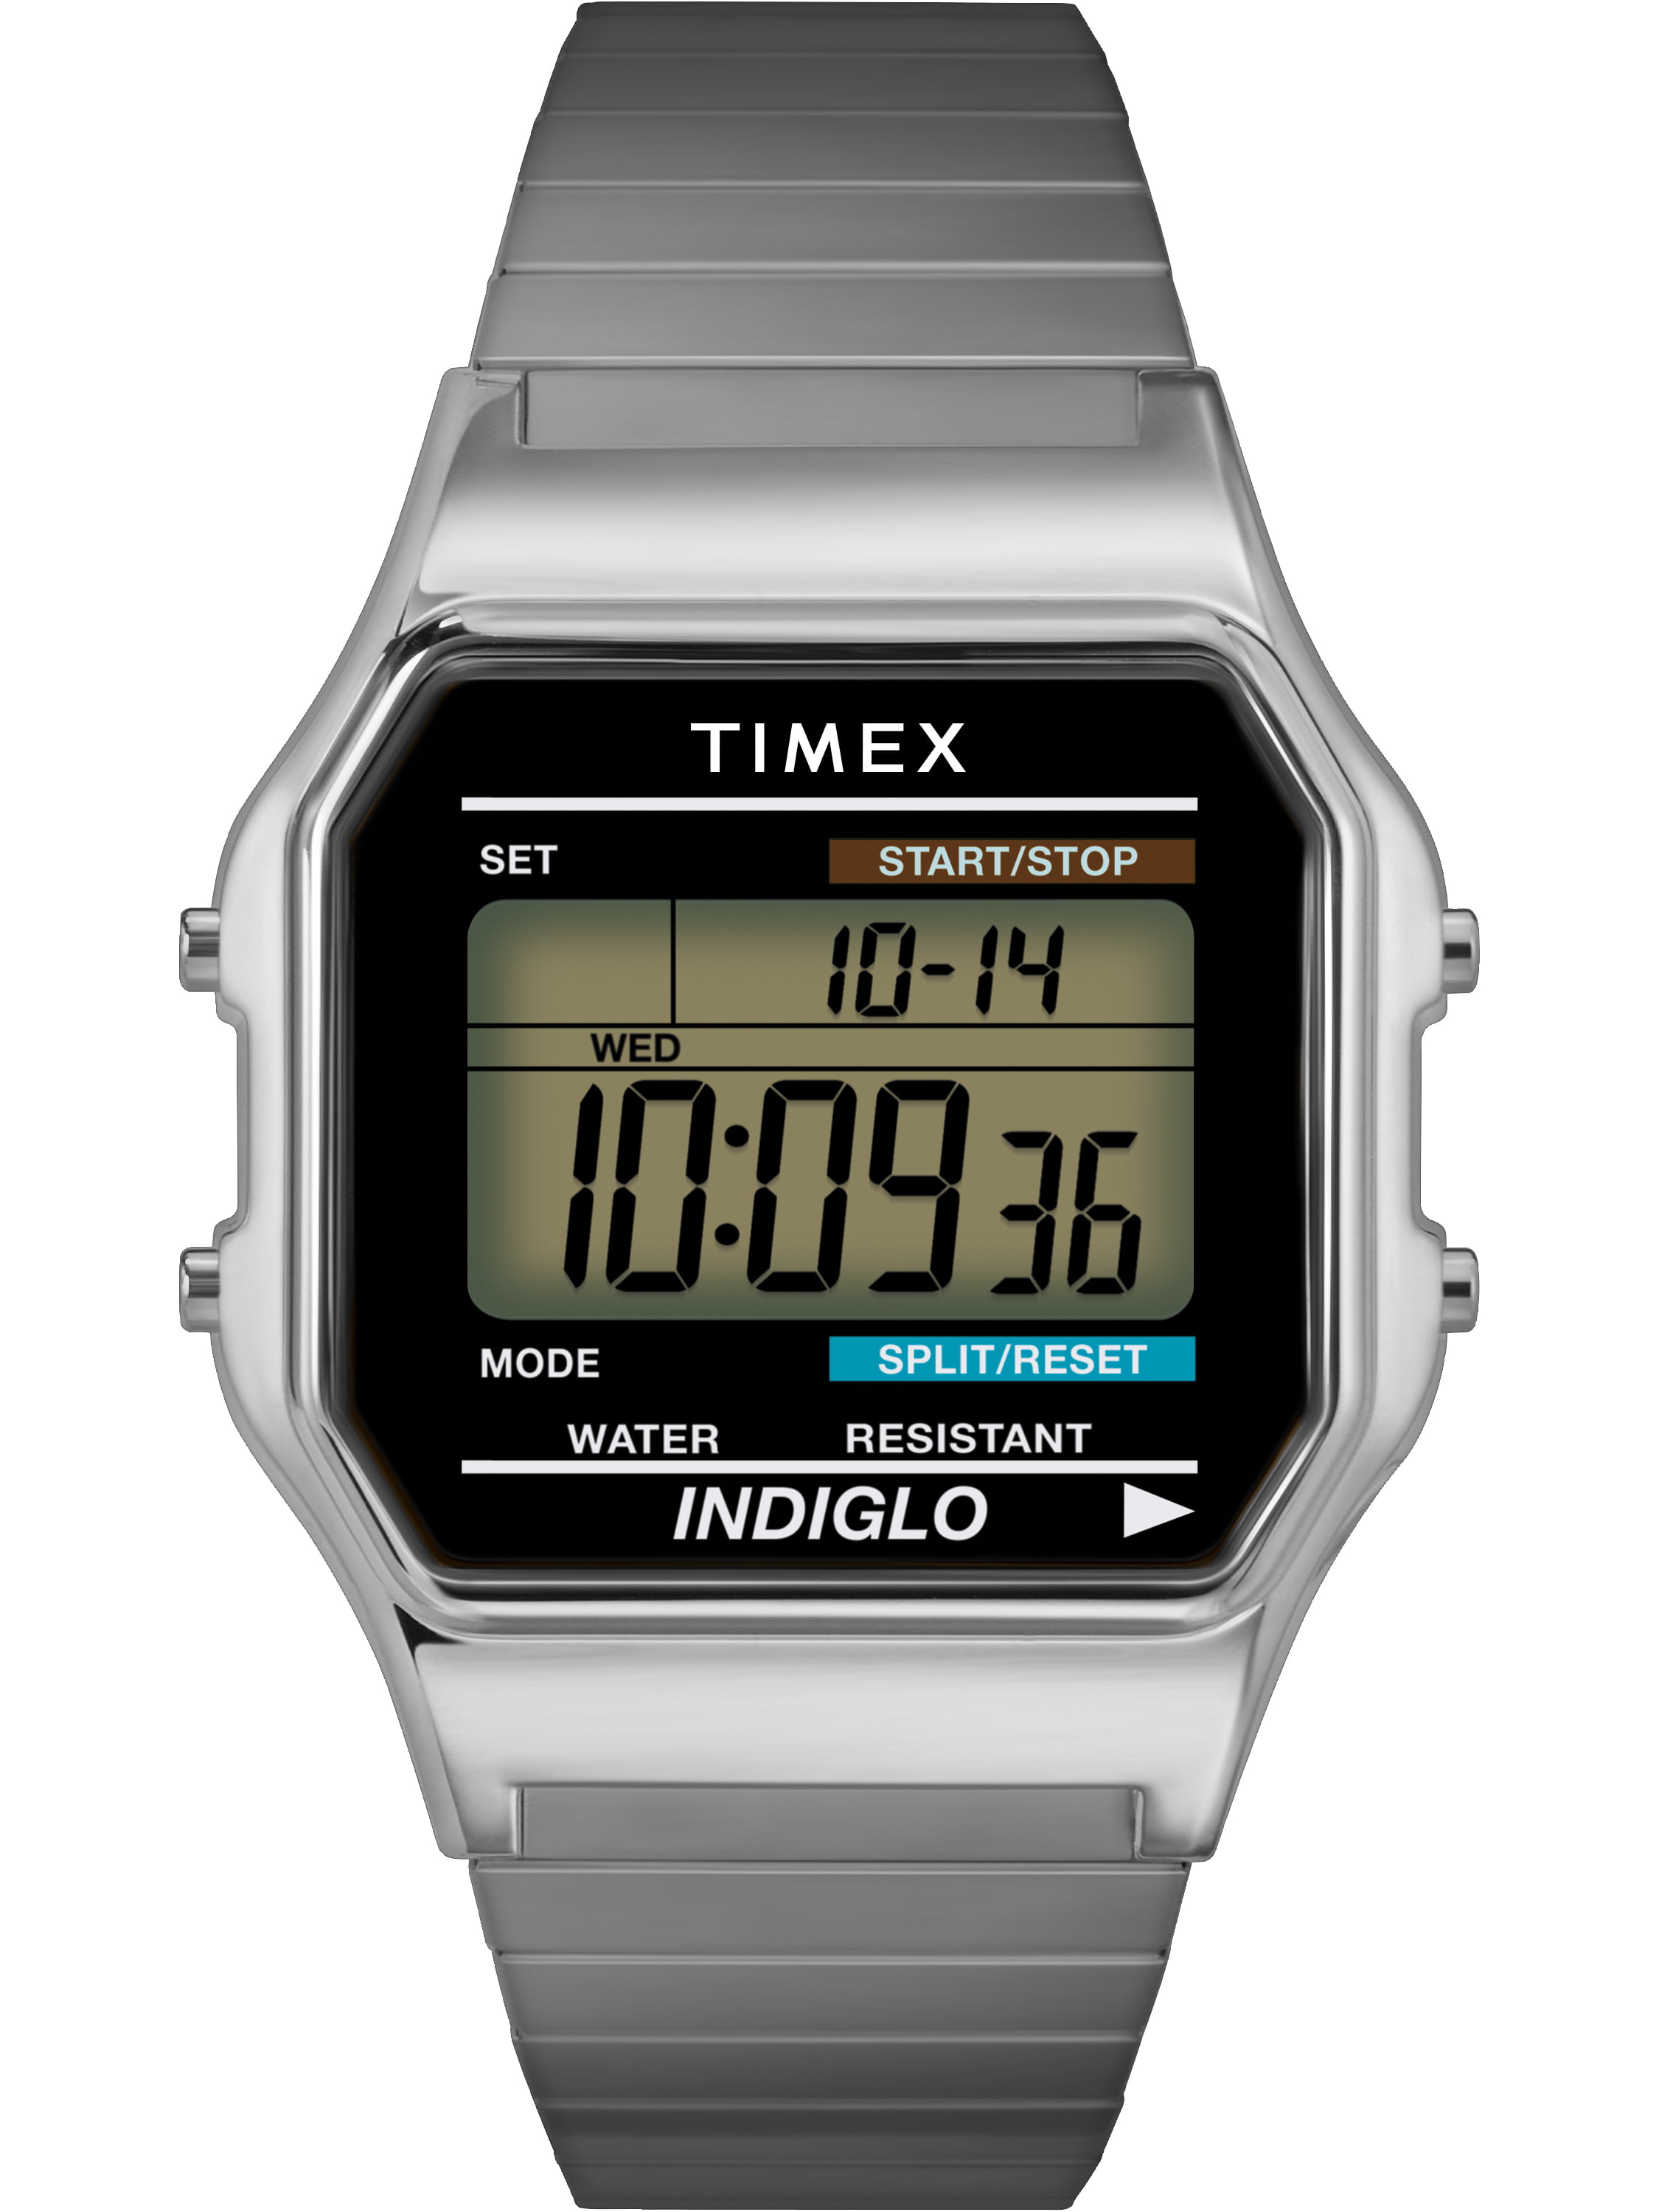 does anybody know the # of this watch? : r/casio